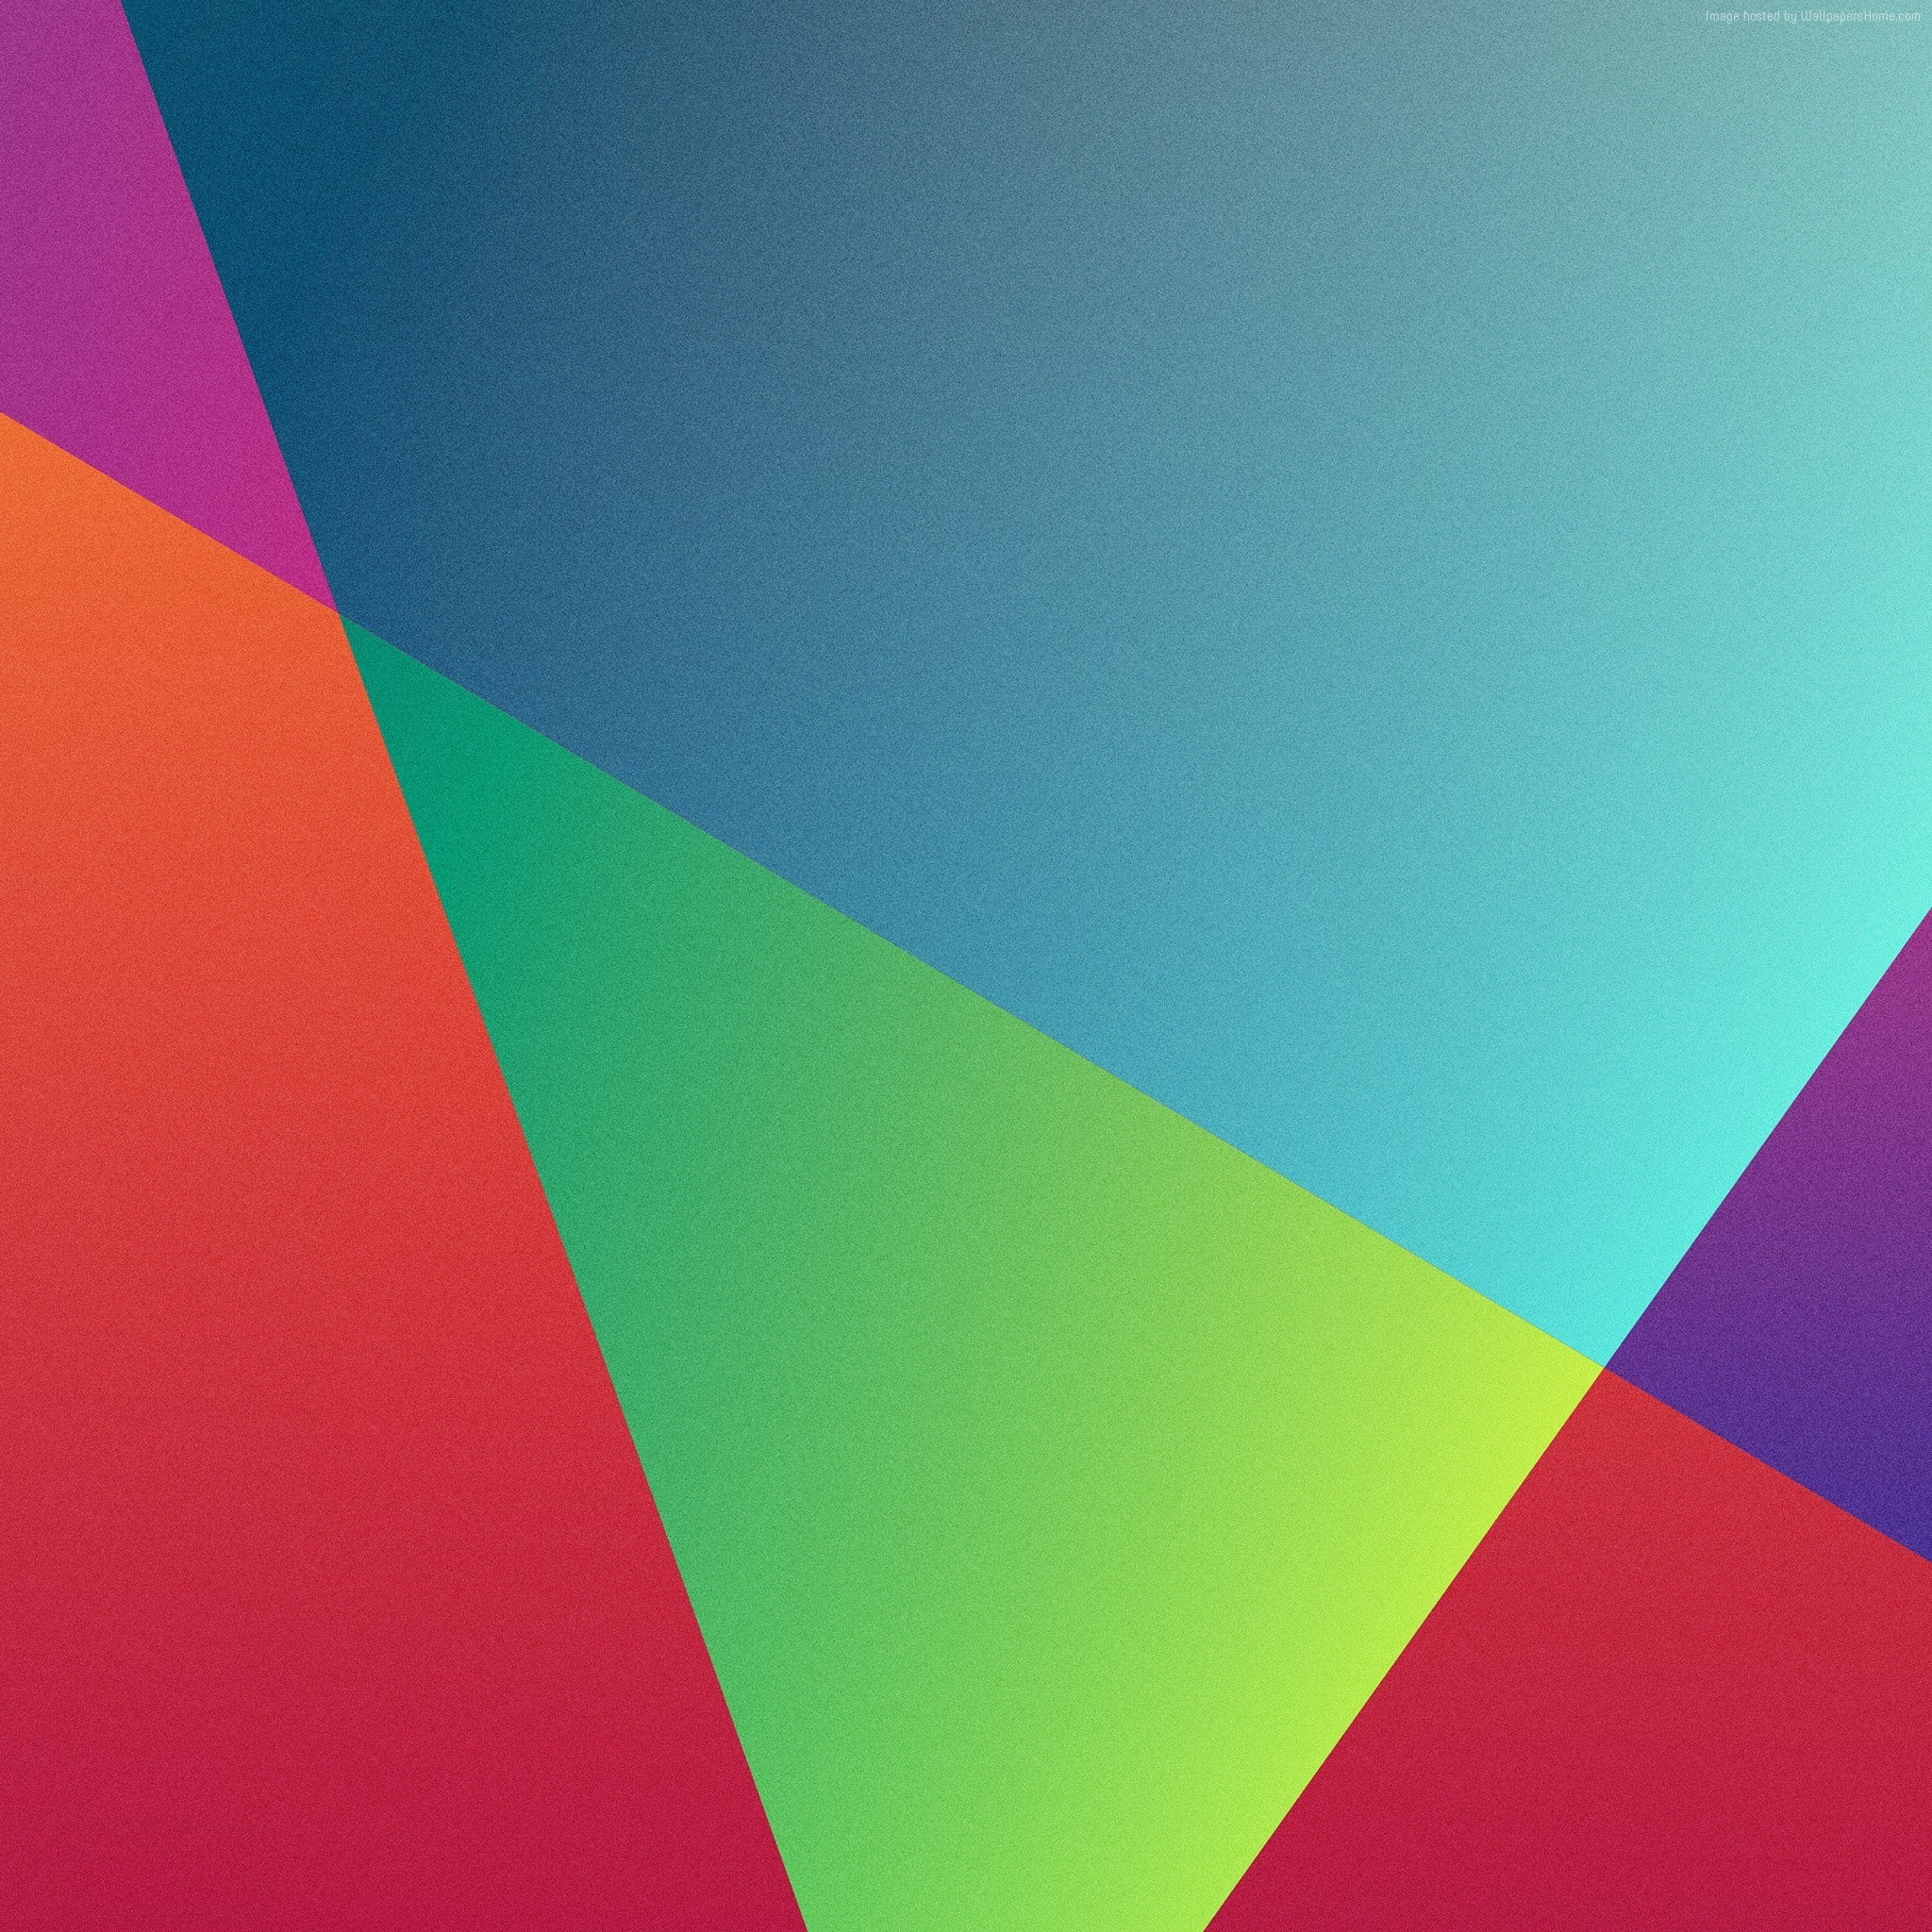 blue, orange, 4k, background, android, triangle, red, pattern